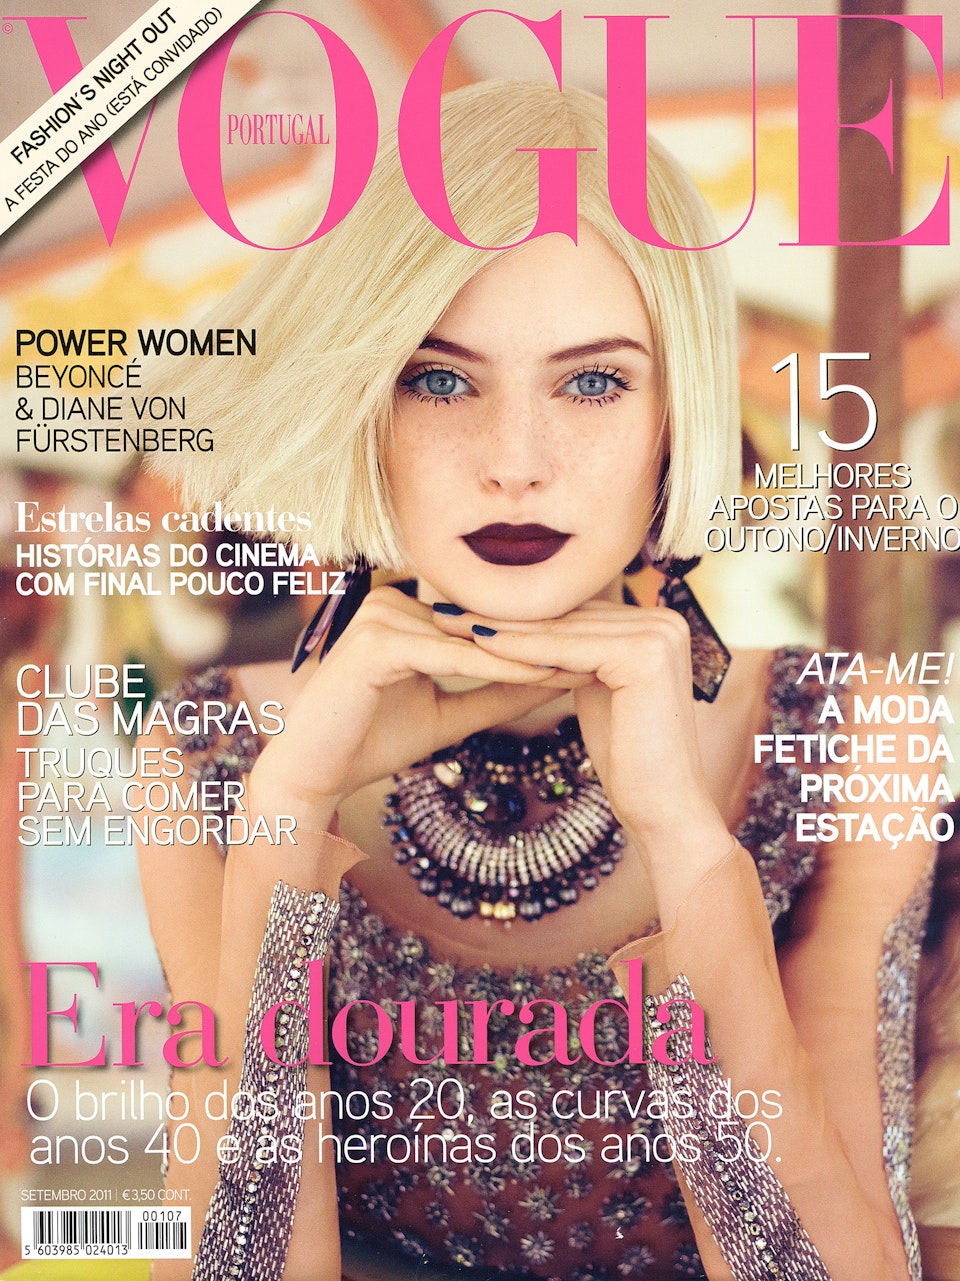 Vogue Portugal carousel Story